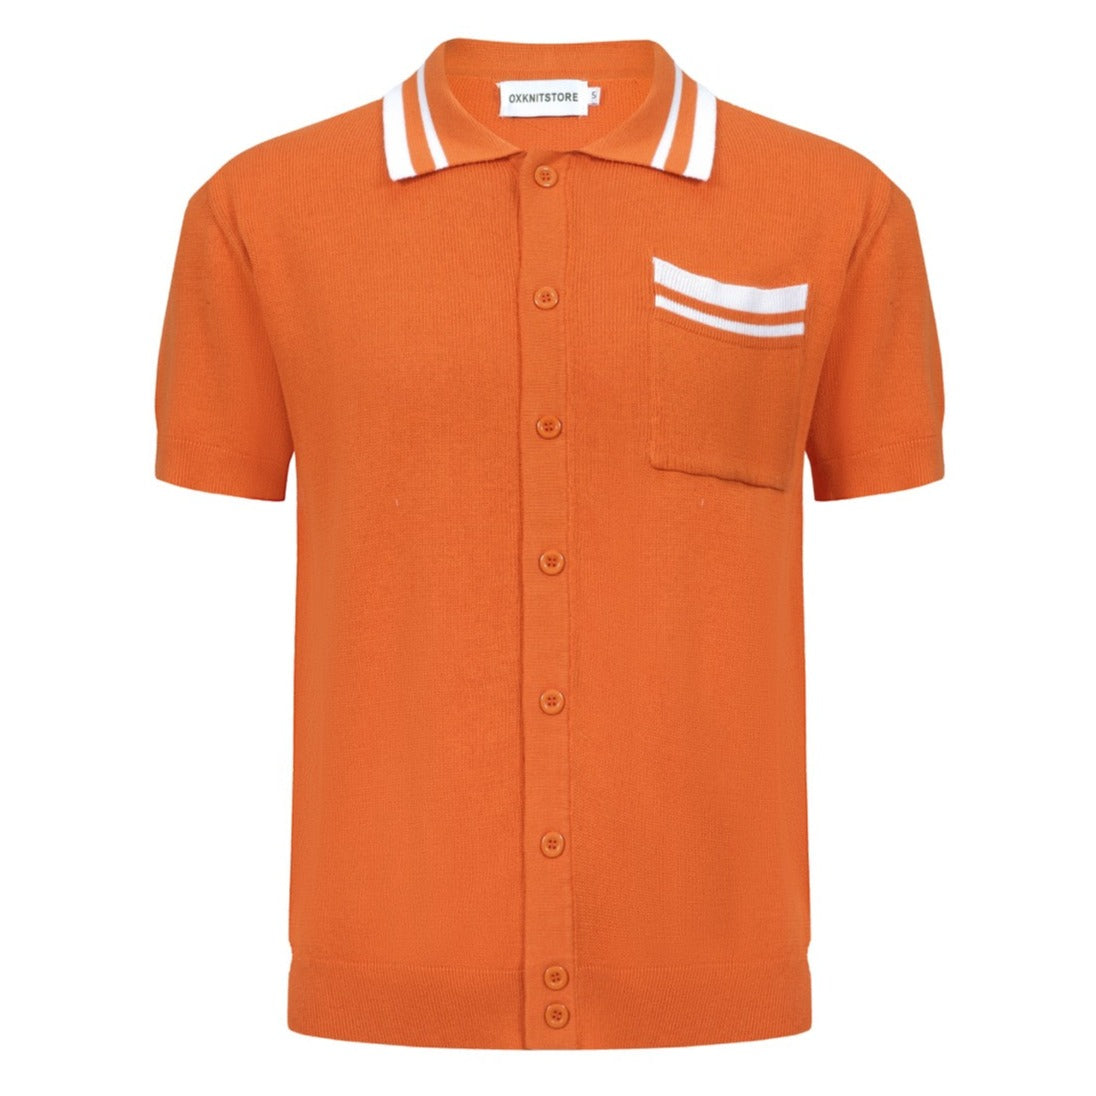 Men's Orange Button Resort Knitted Polo Shirt With Breast Pocket